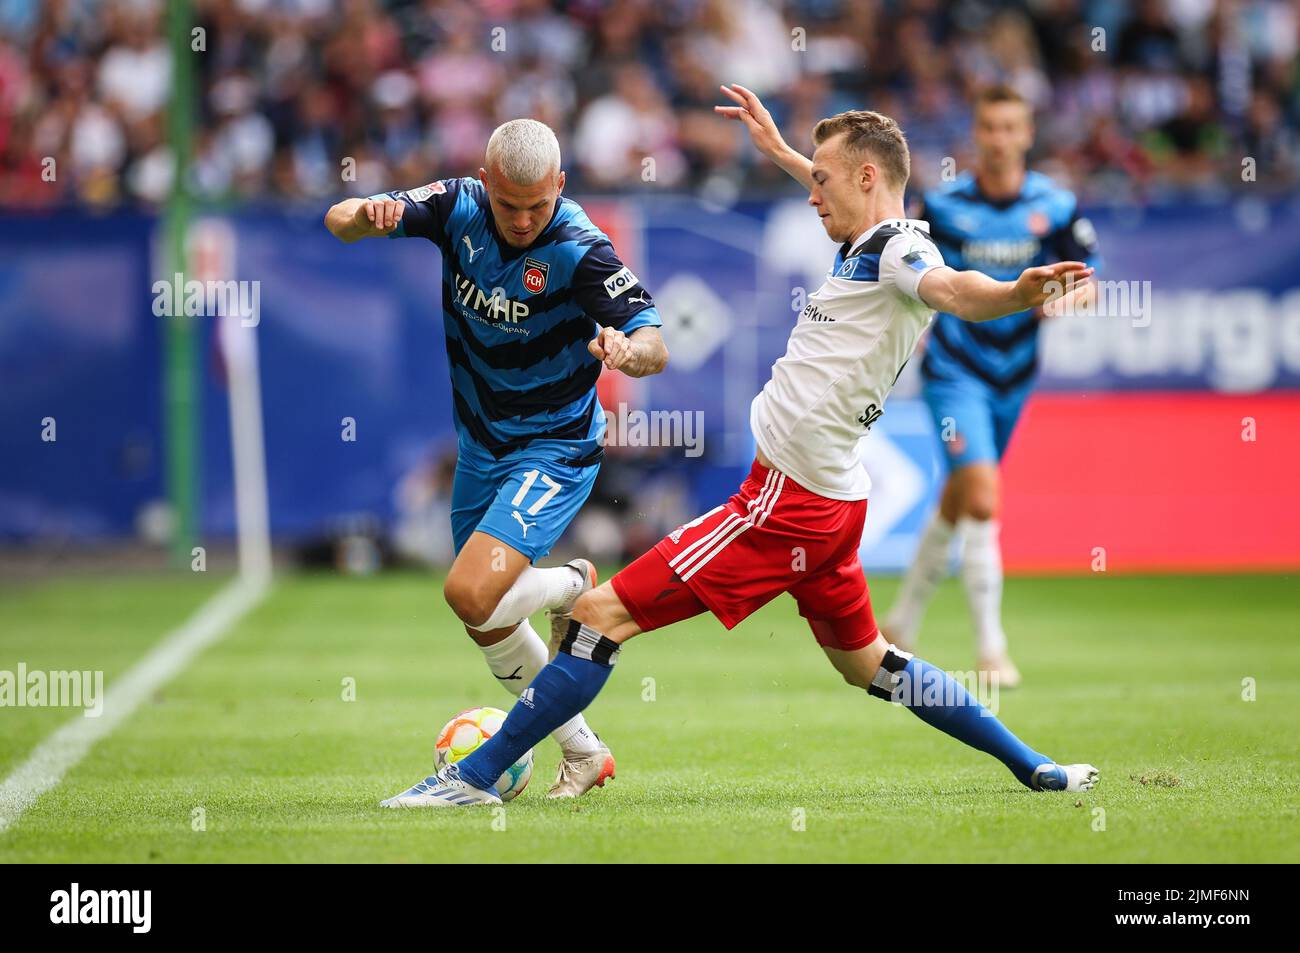 Hamburg, Germany. 06th Aug, 2022. Soccer: 2nd Bundesliga, Matchday 3, Hamburger SV - 1. FC Heidenheim at Volksparkstadion. Hamburg's Sebastian Schonlau (r) and Heidenheim's Florian Pick fight for the ball. Credit: Christian Charisius/dpa - IMPORTANT NOTE: In accordance with the requirements of the DFL Deutsche Fußball Liga and the DFB Deutscher Fußball-Bund, it is prohibited to use or have used photographs taken in the stadium and/or of the match in the form of sequence pictures and/or video-like photo series./dpa/Alamy Live News Stock Photo